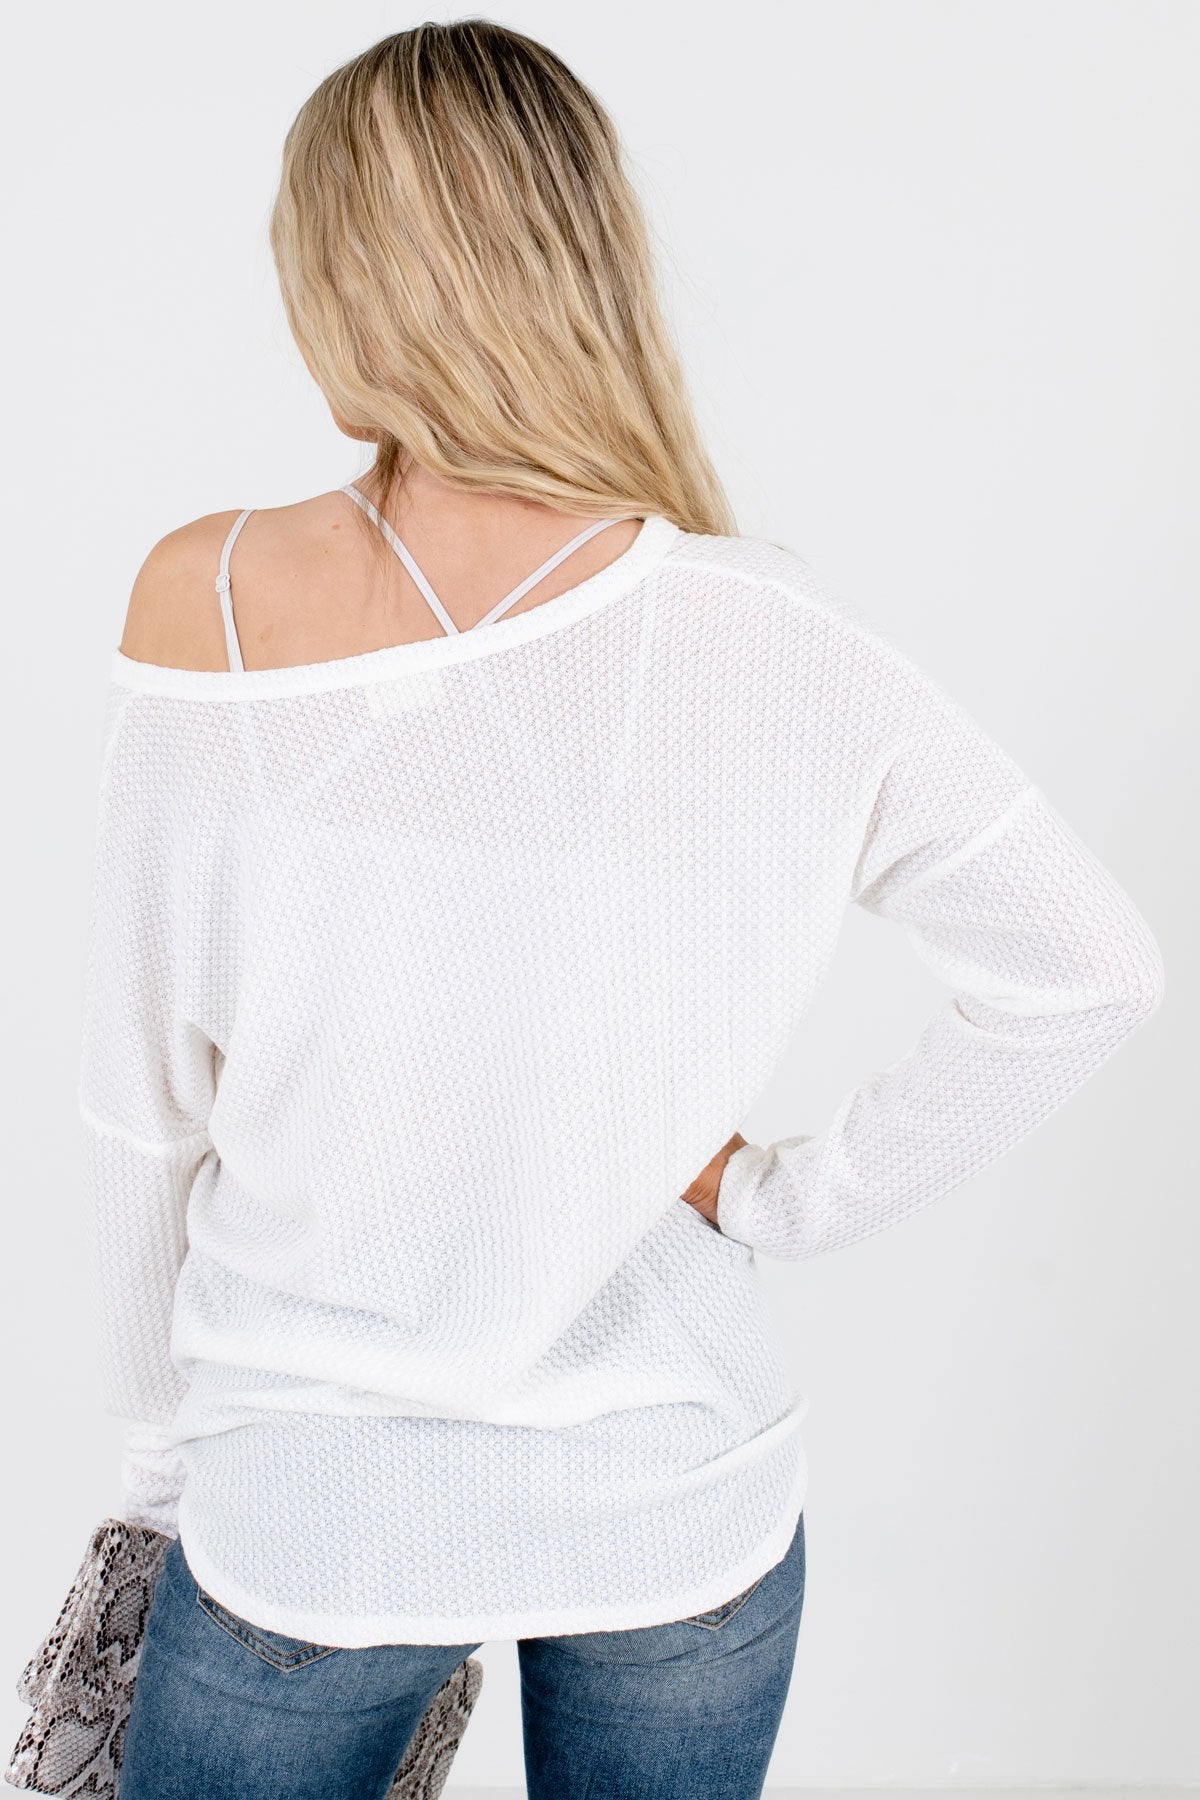 Women's White High-Quality Waffle Knit Material Boutique Top